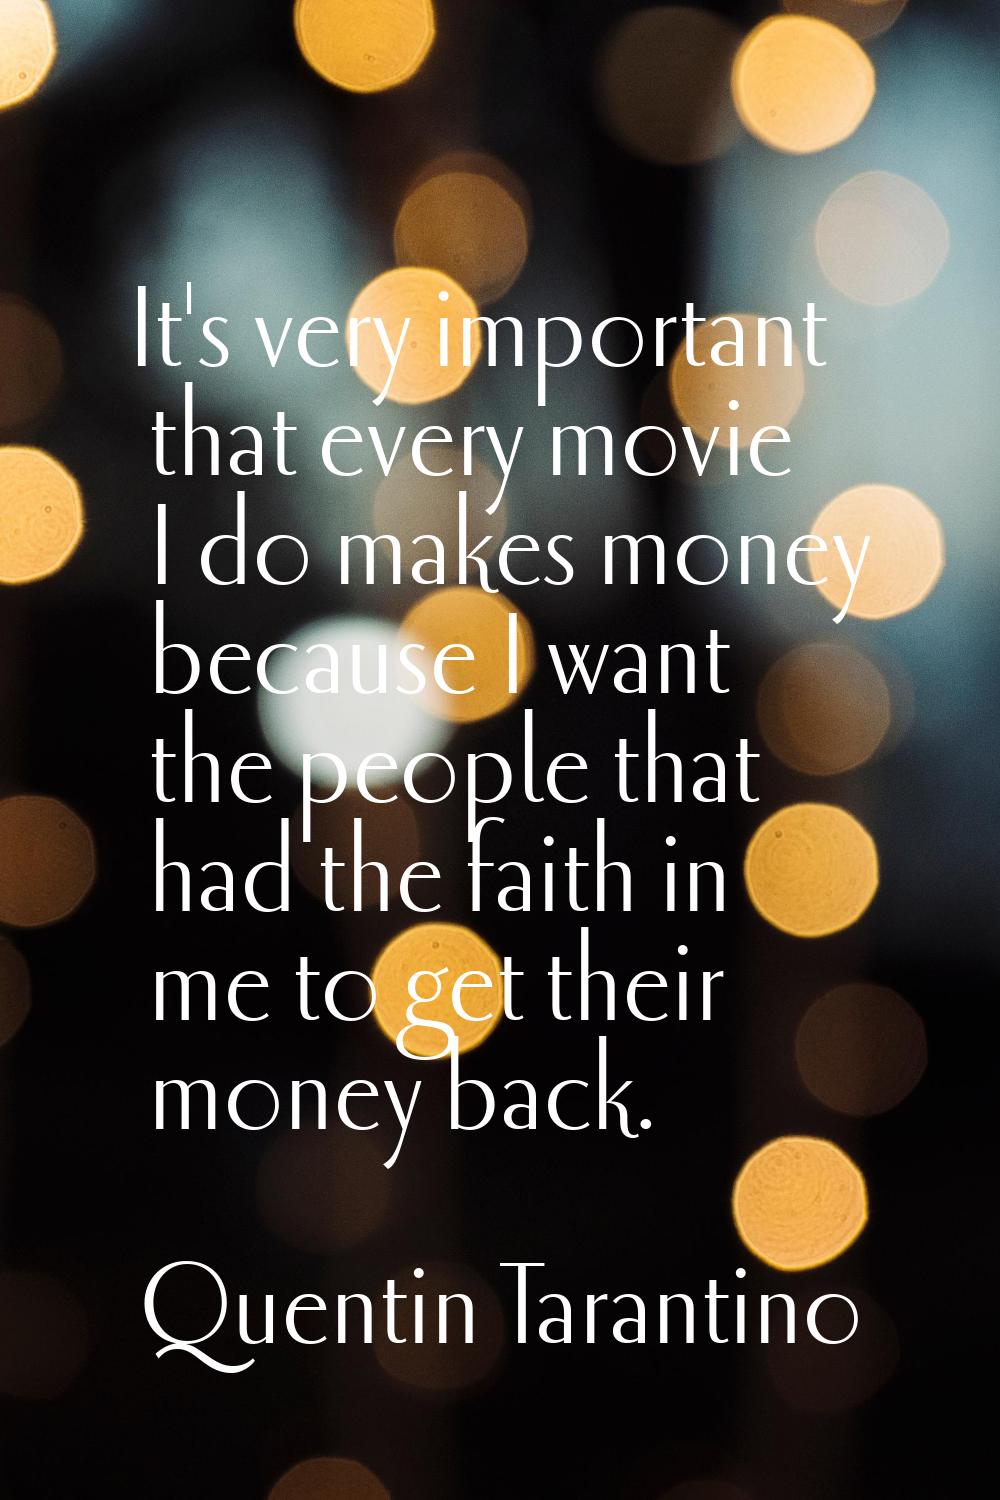 It's very important that every movie I do makes money because I want the people that had the faith 